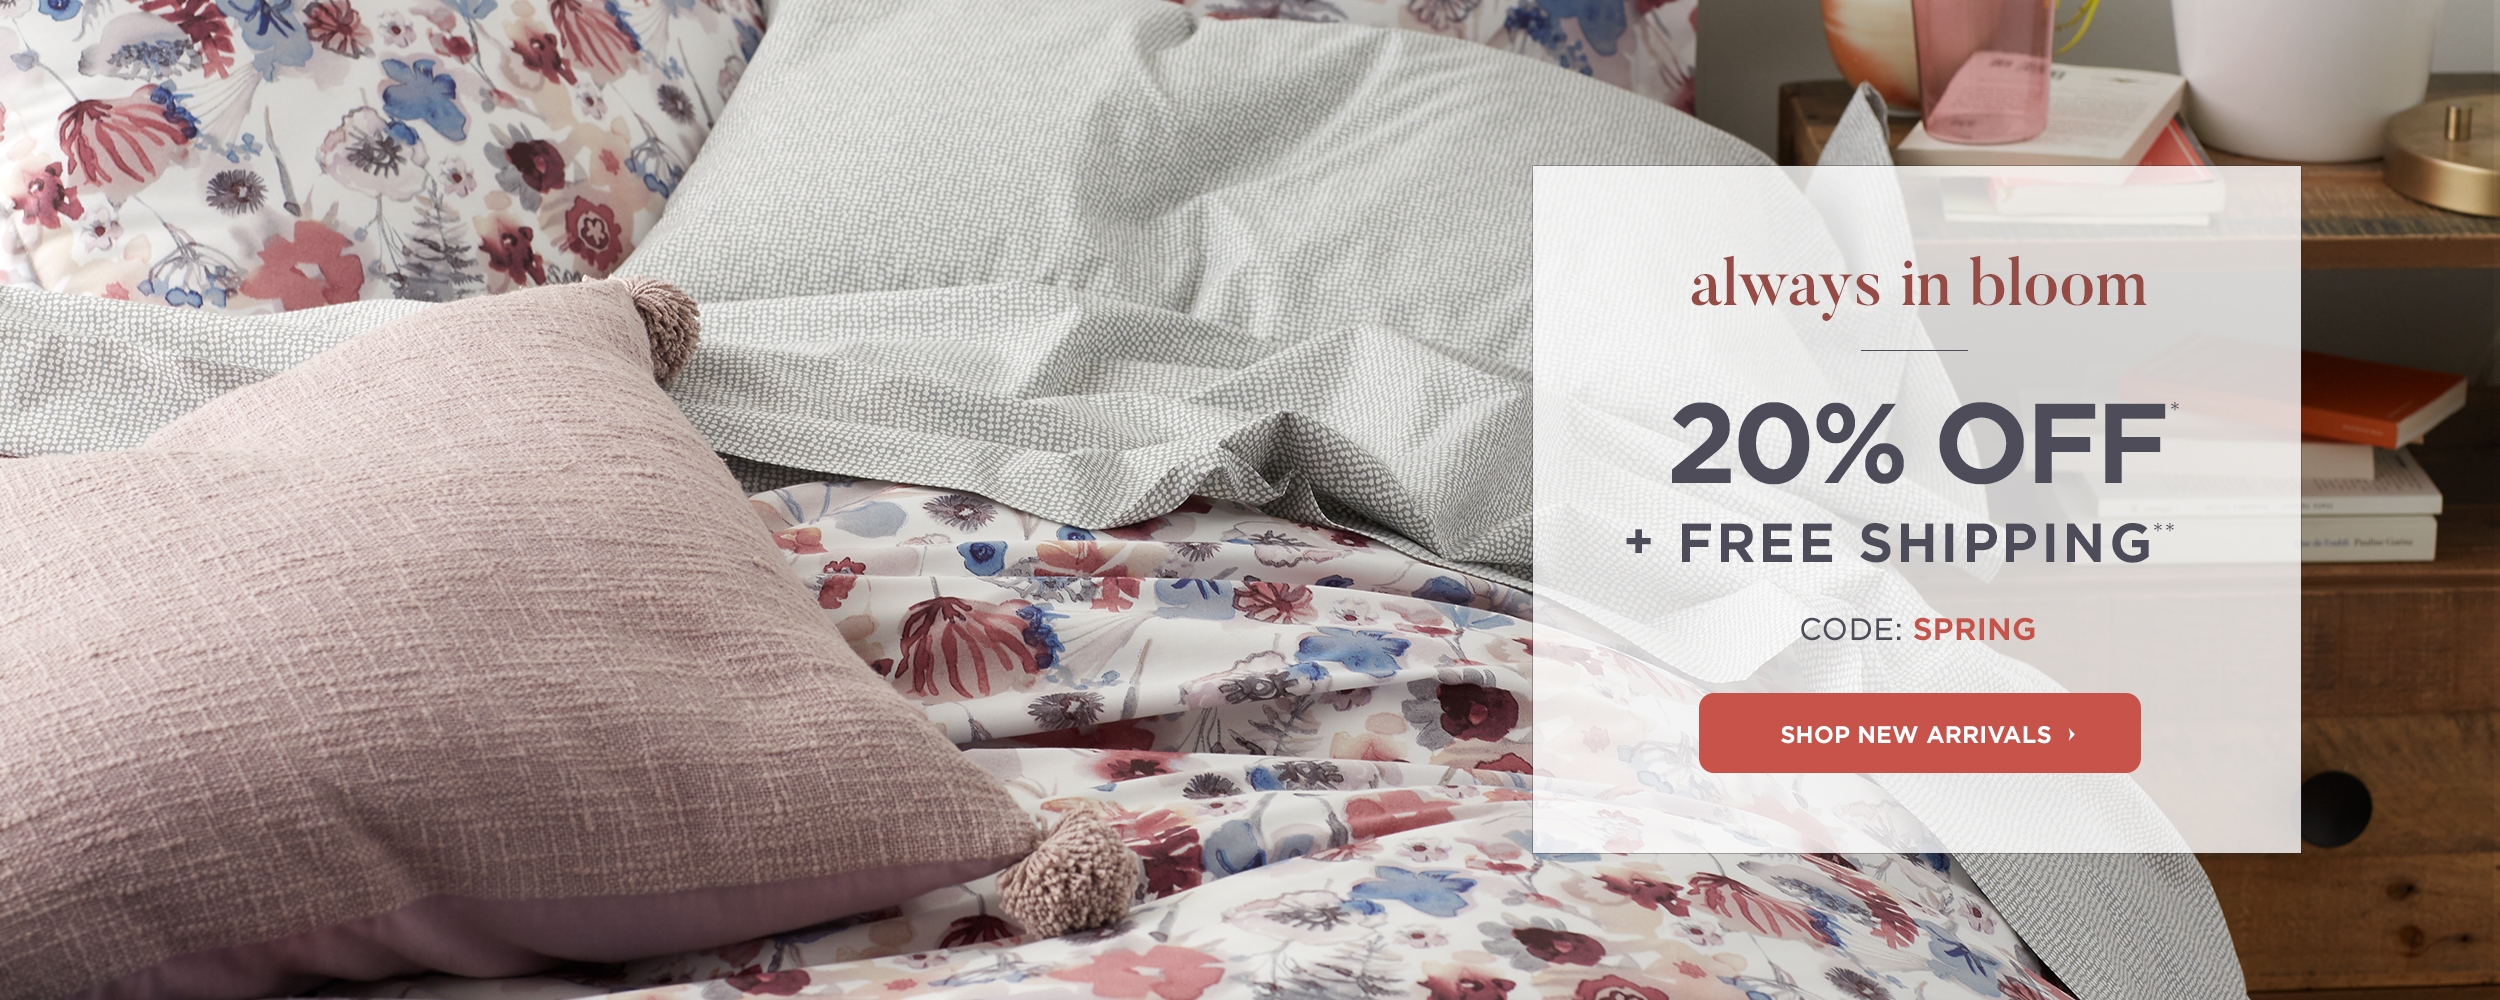 Don't forget to use this 20% OFF Coupon when shopping for your bedding!&nbsp;